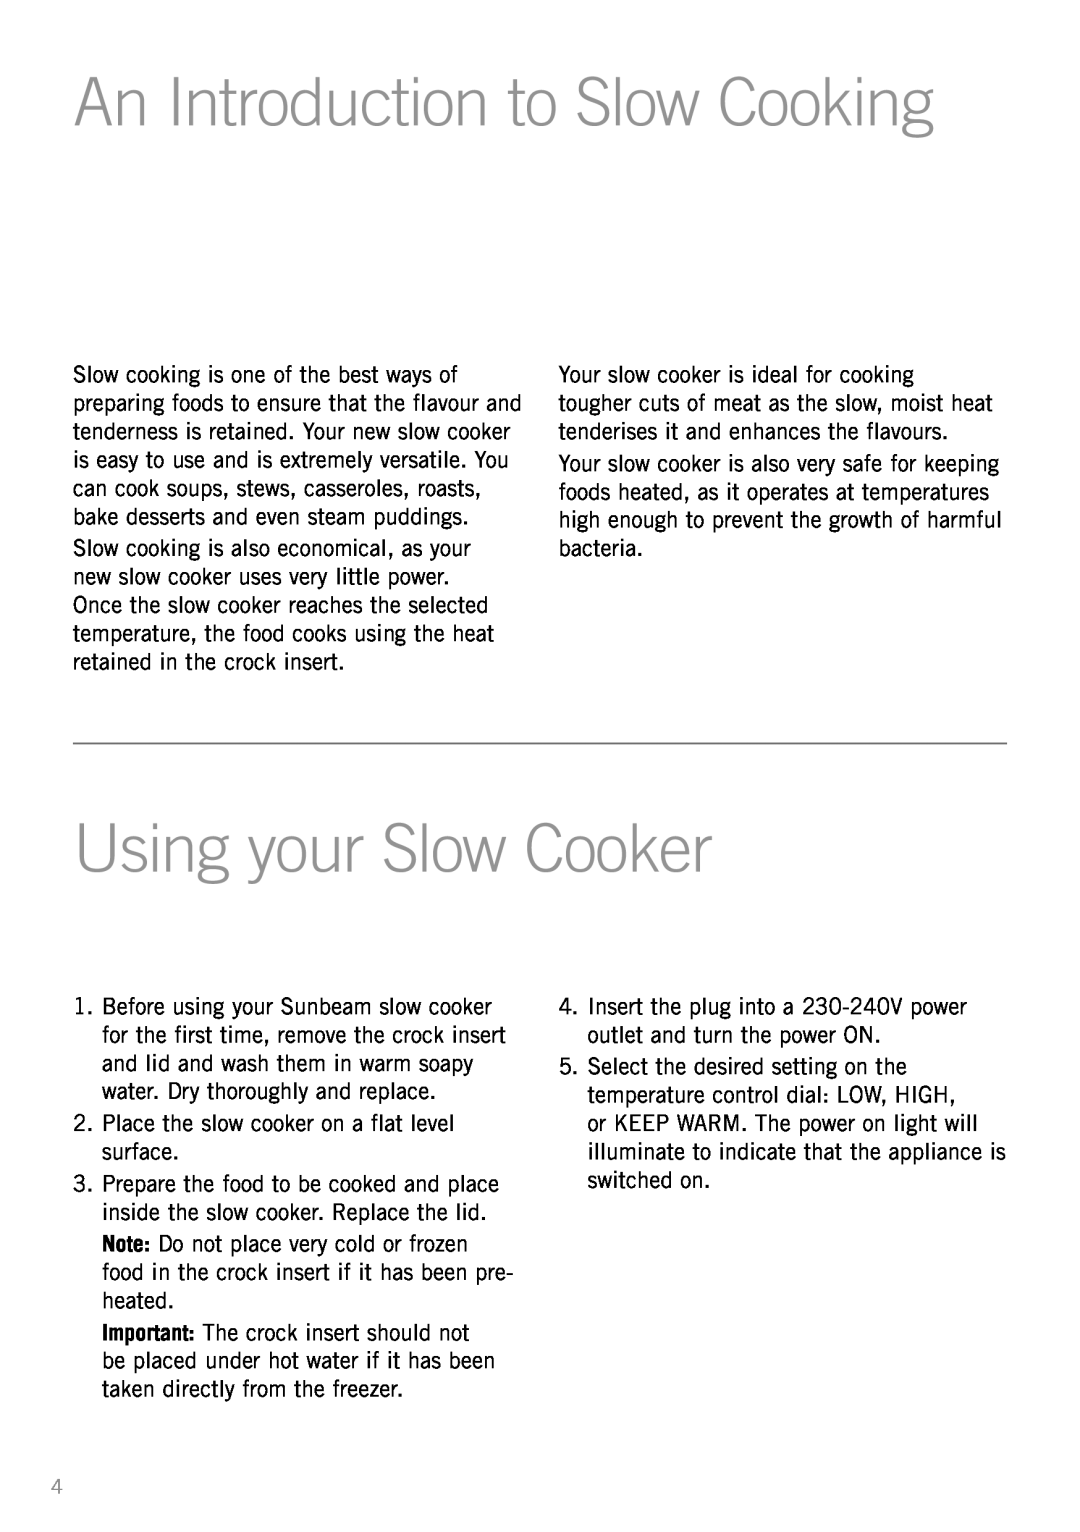 Sunbeam HP3510 manual An Introduction to Slow Cooking, Using your Slow Cooker 